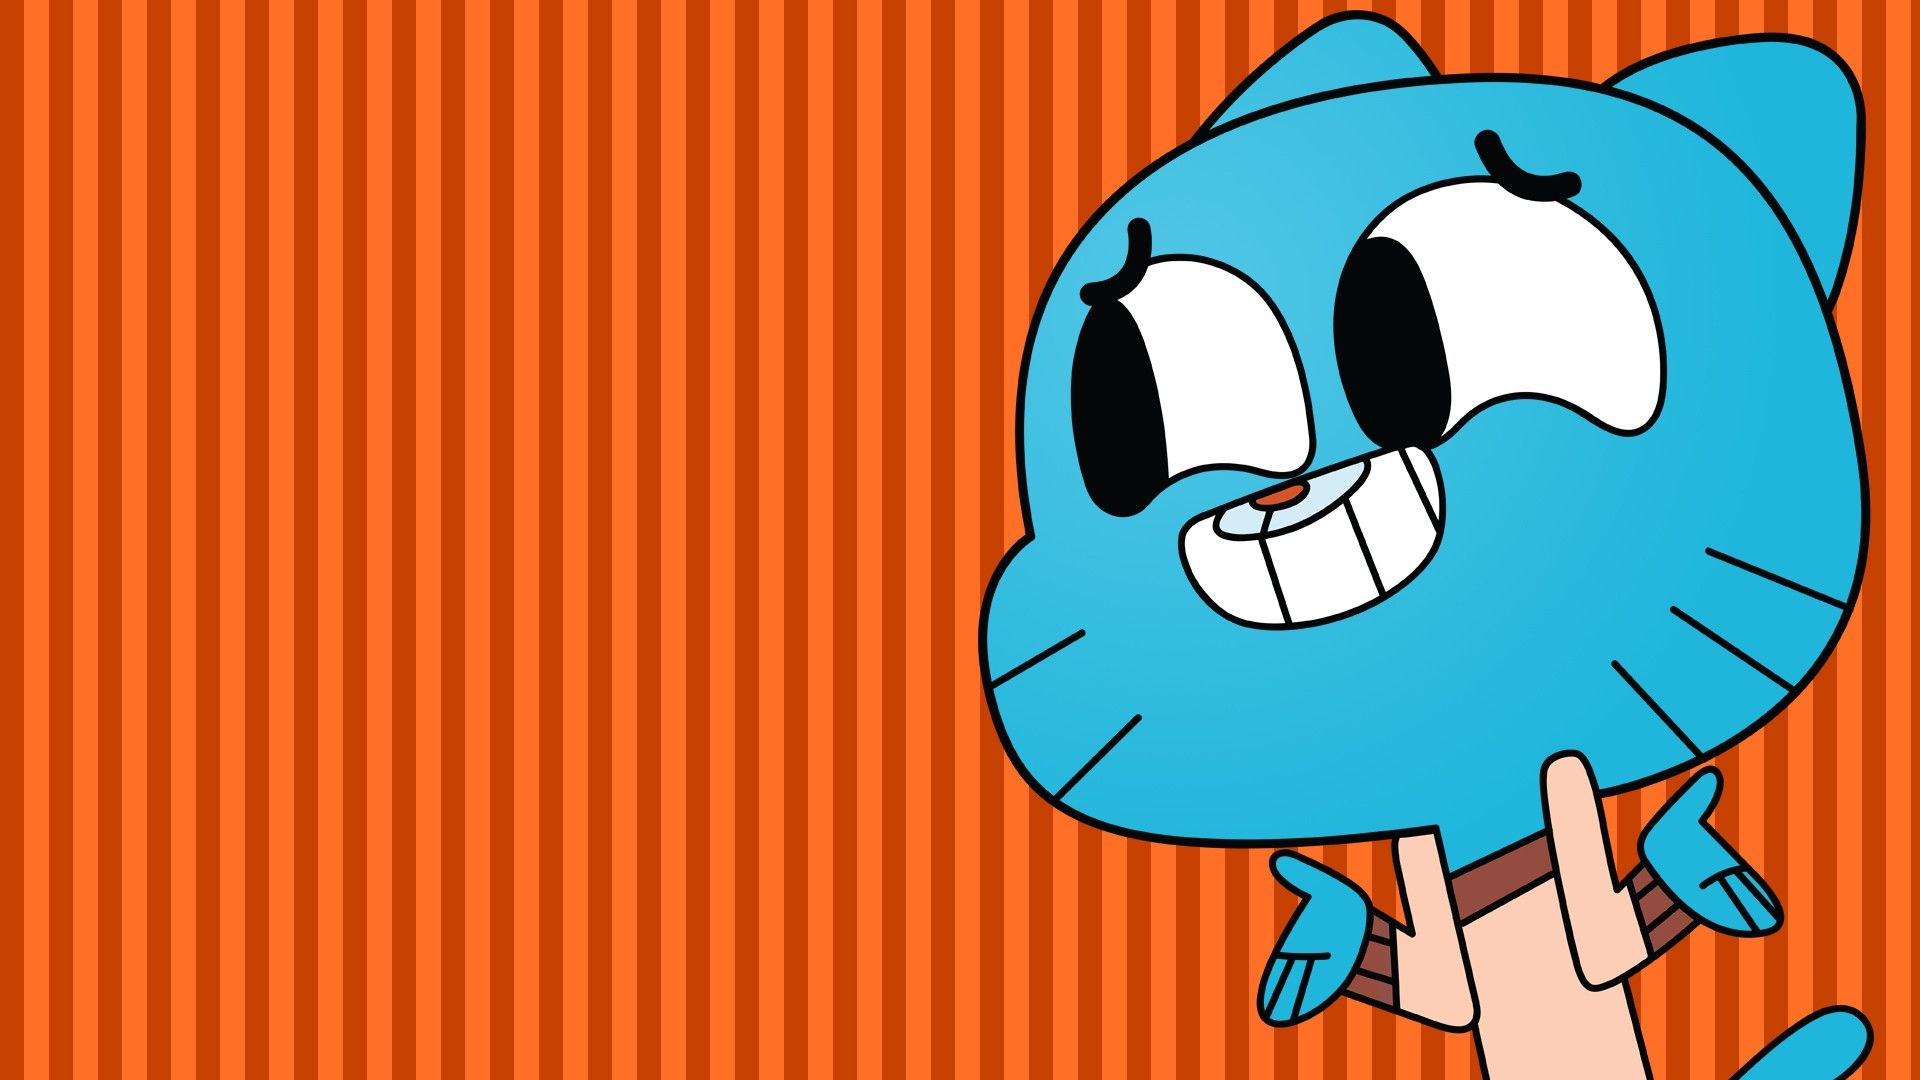 Gumball Wallpapers.